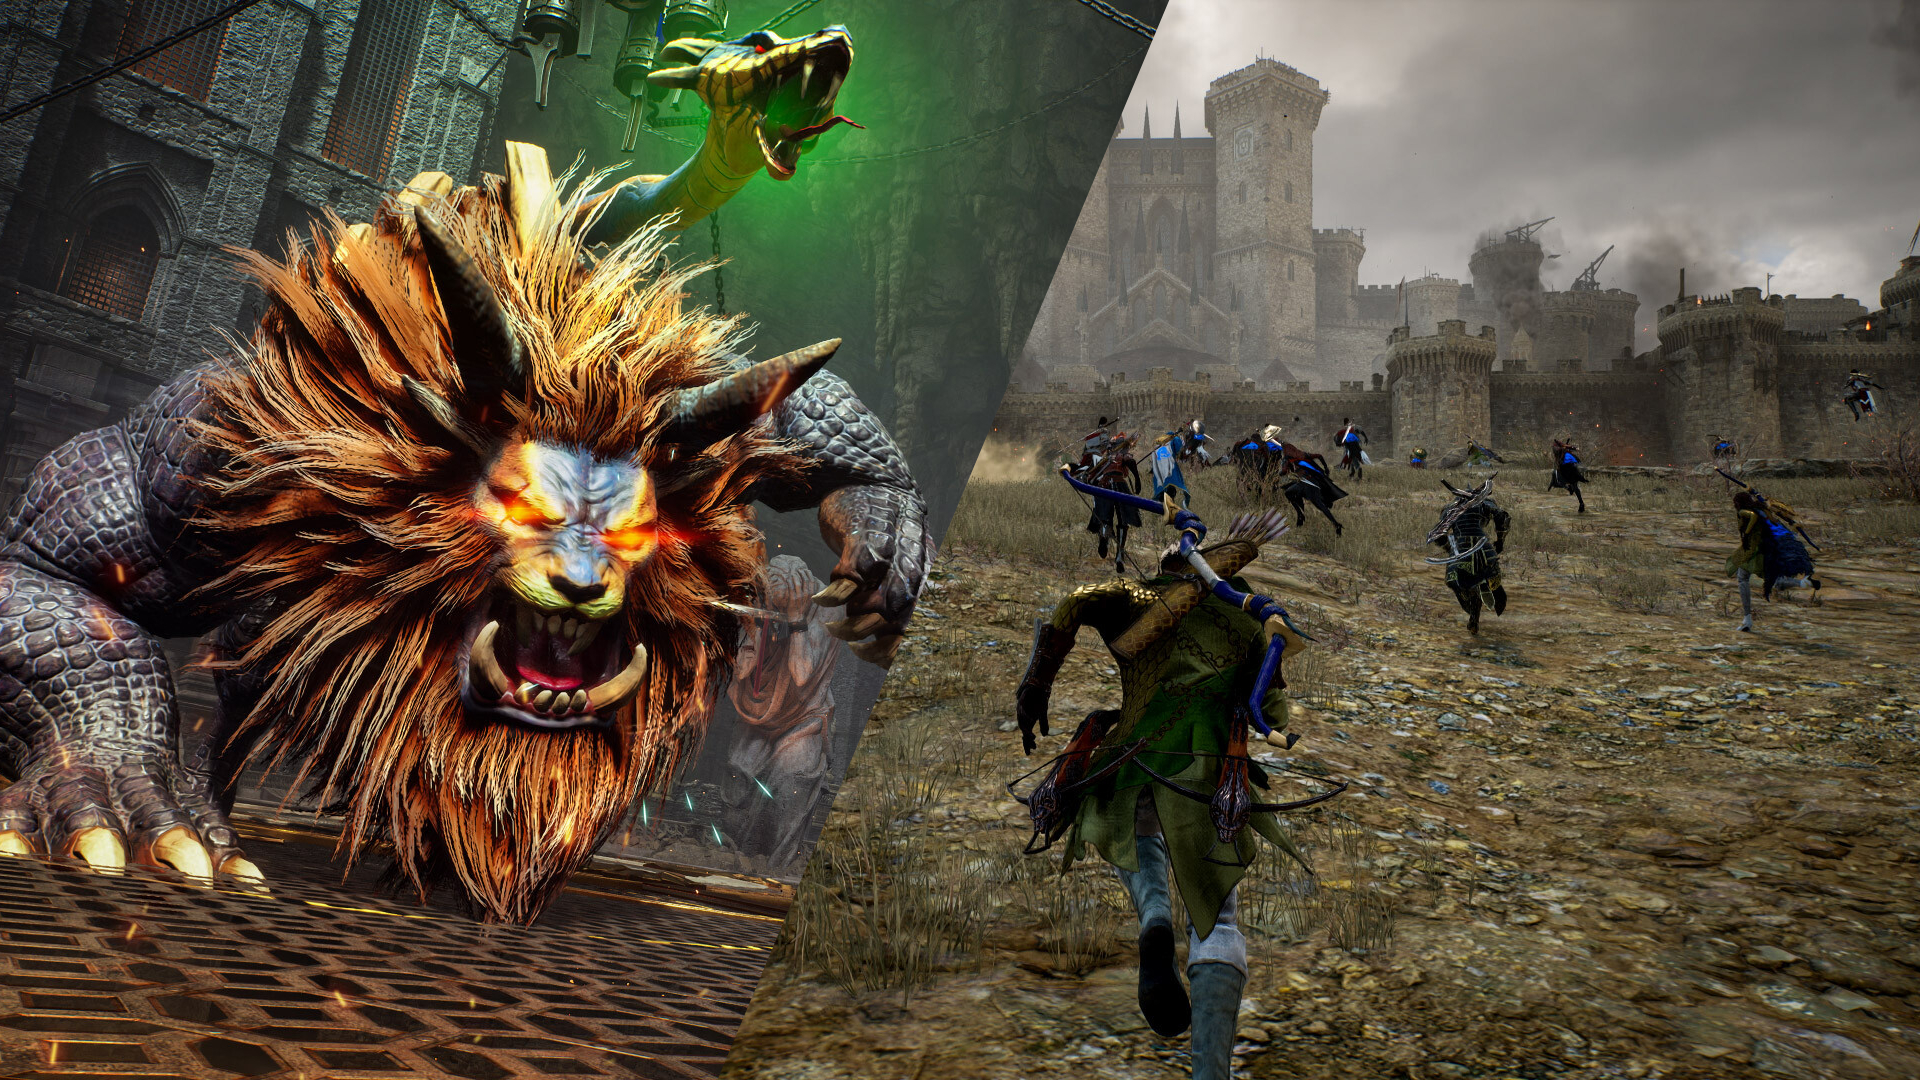 Throne & Liberty Lets You Transform Into Wild Beasts to Accomplish